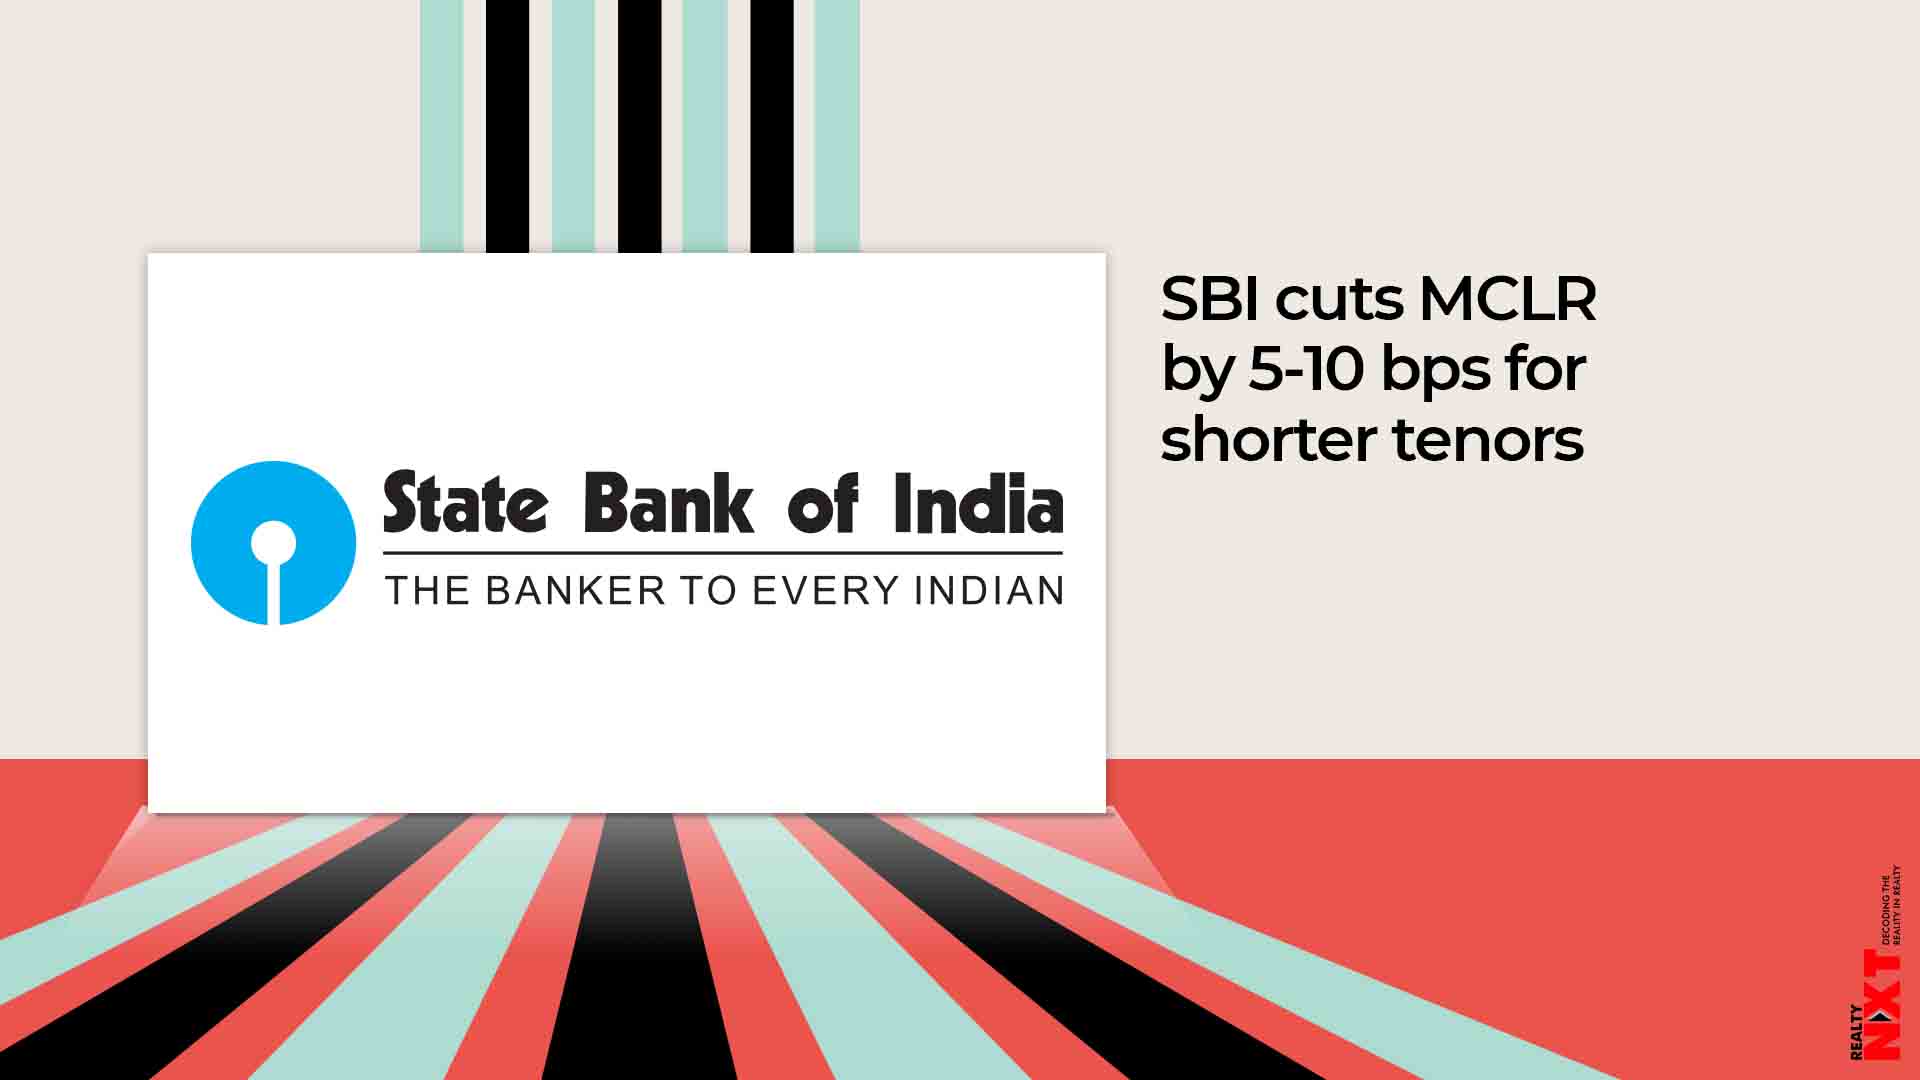 Sbi Reduced Mclr By 5 10 Bps For Shorter Tenors Realtynxt 3040